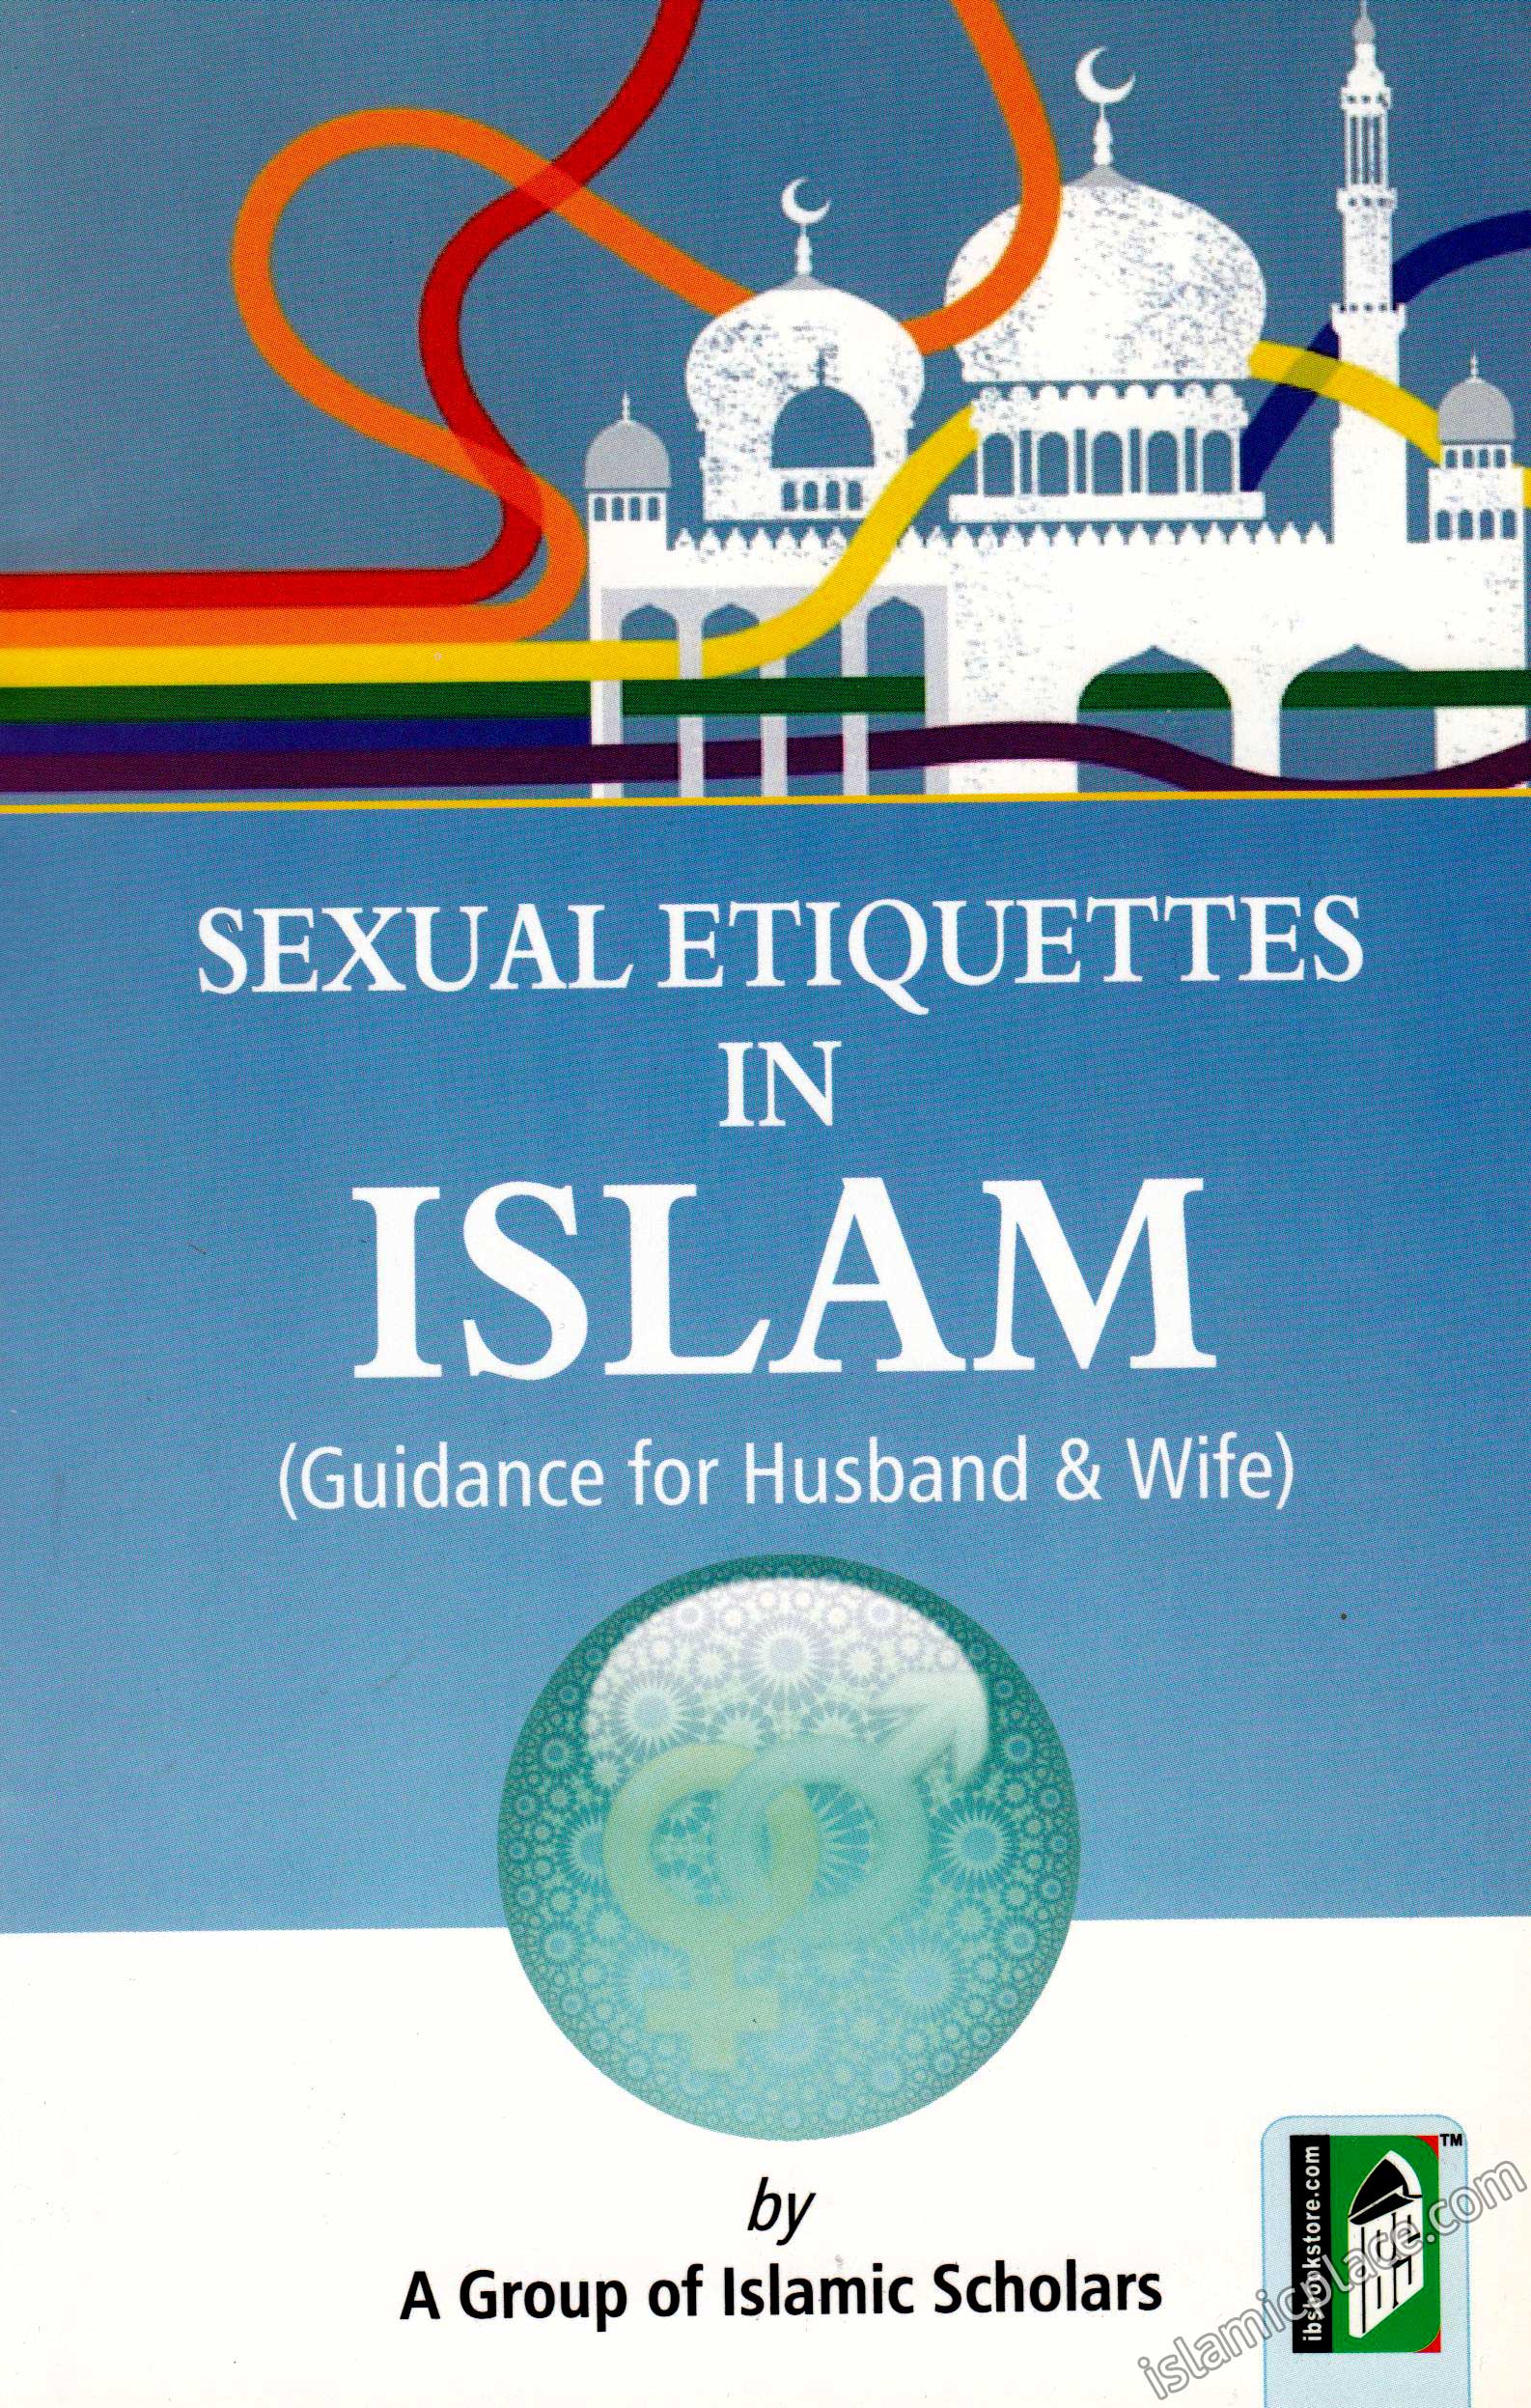 Sexual Etiquettes in Islam (Guidance for Husband & Wife)